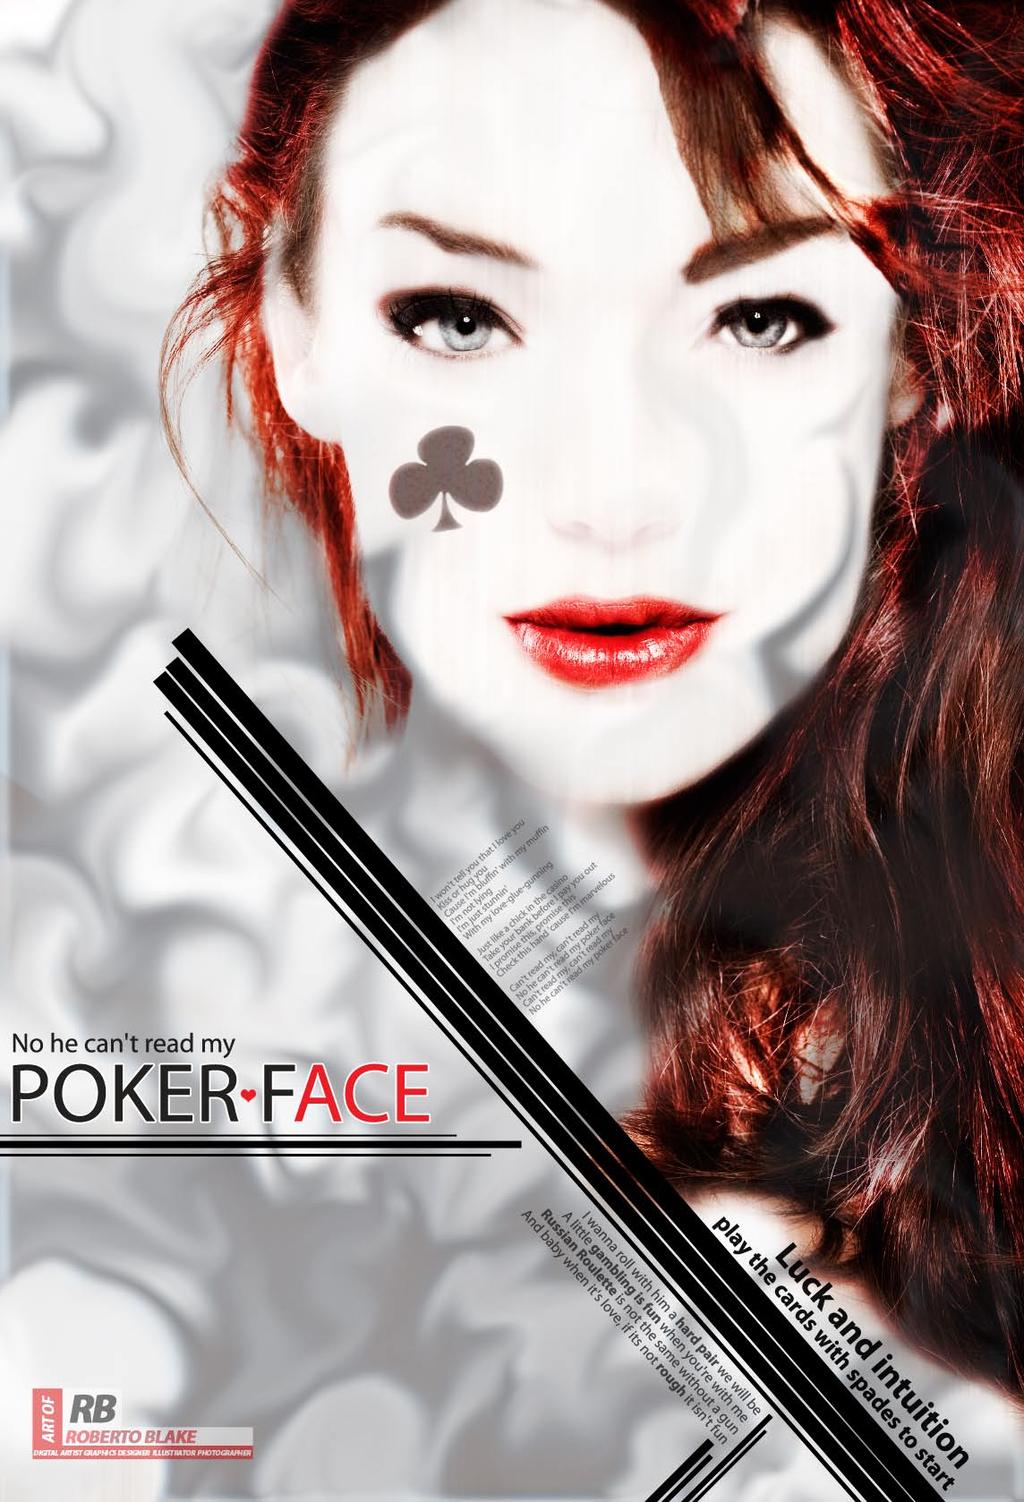 Poker Face More often than not I get the creative inspiration for my artwork from music, movies, or books.